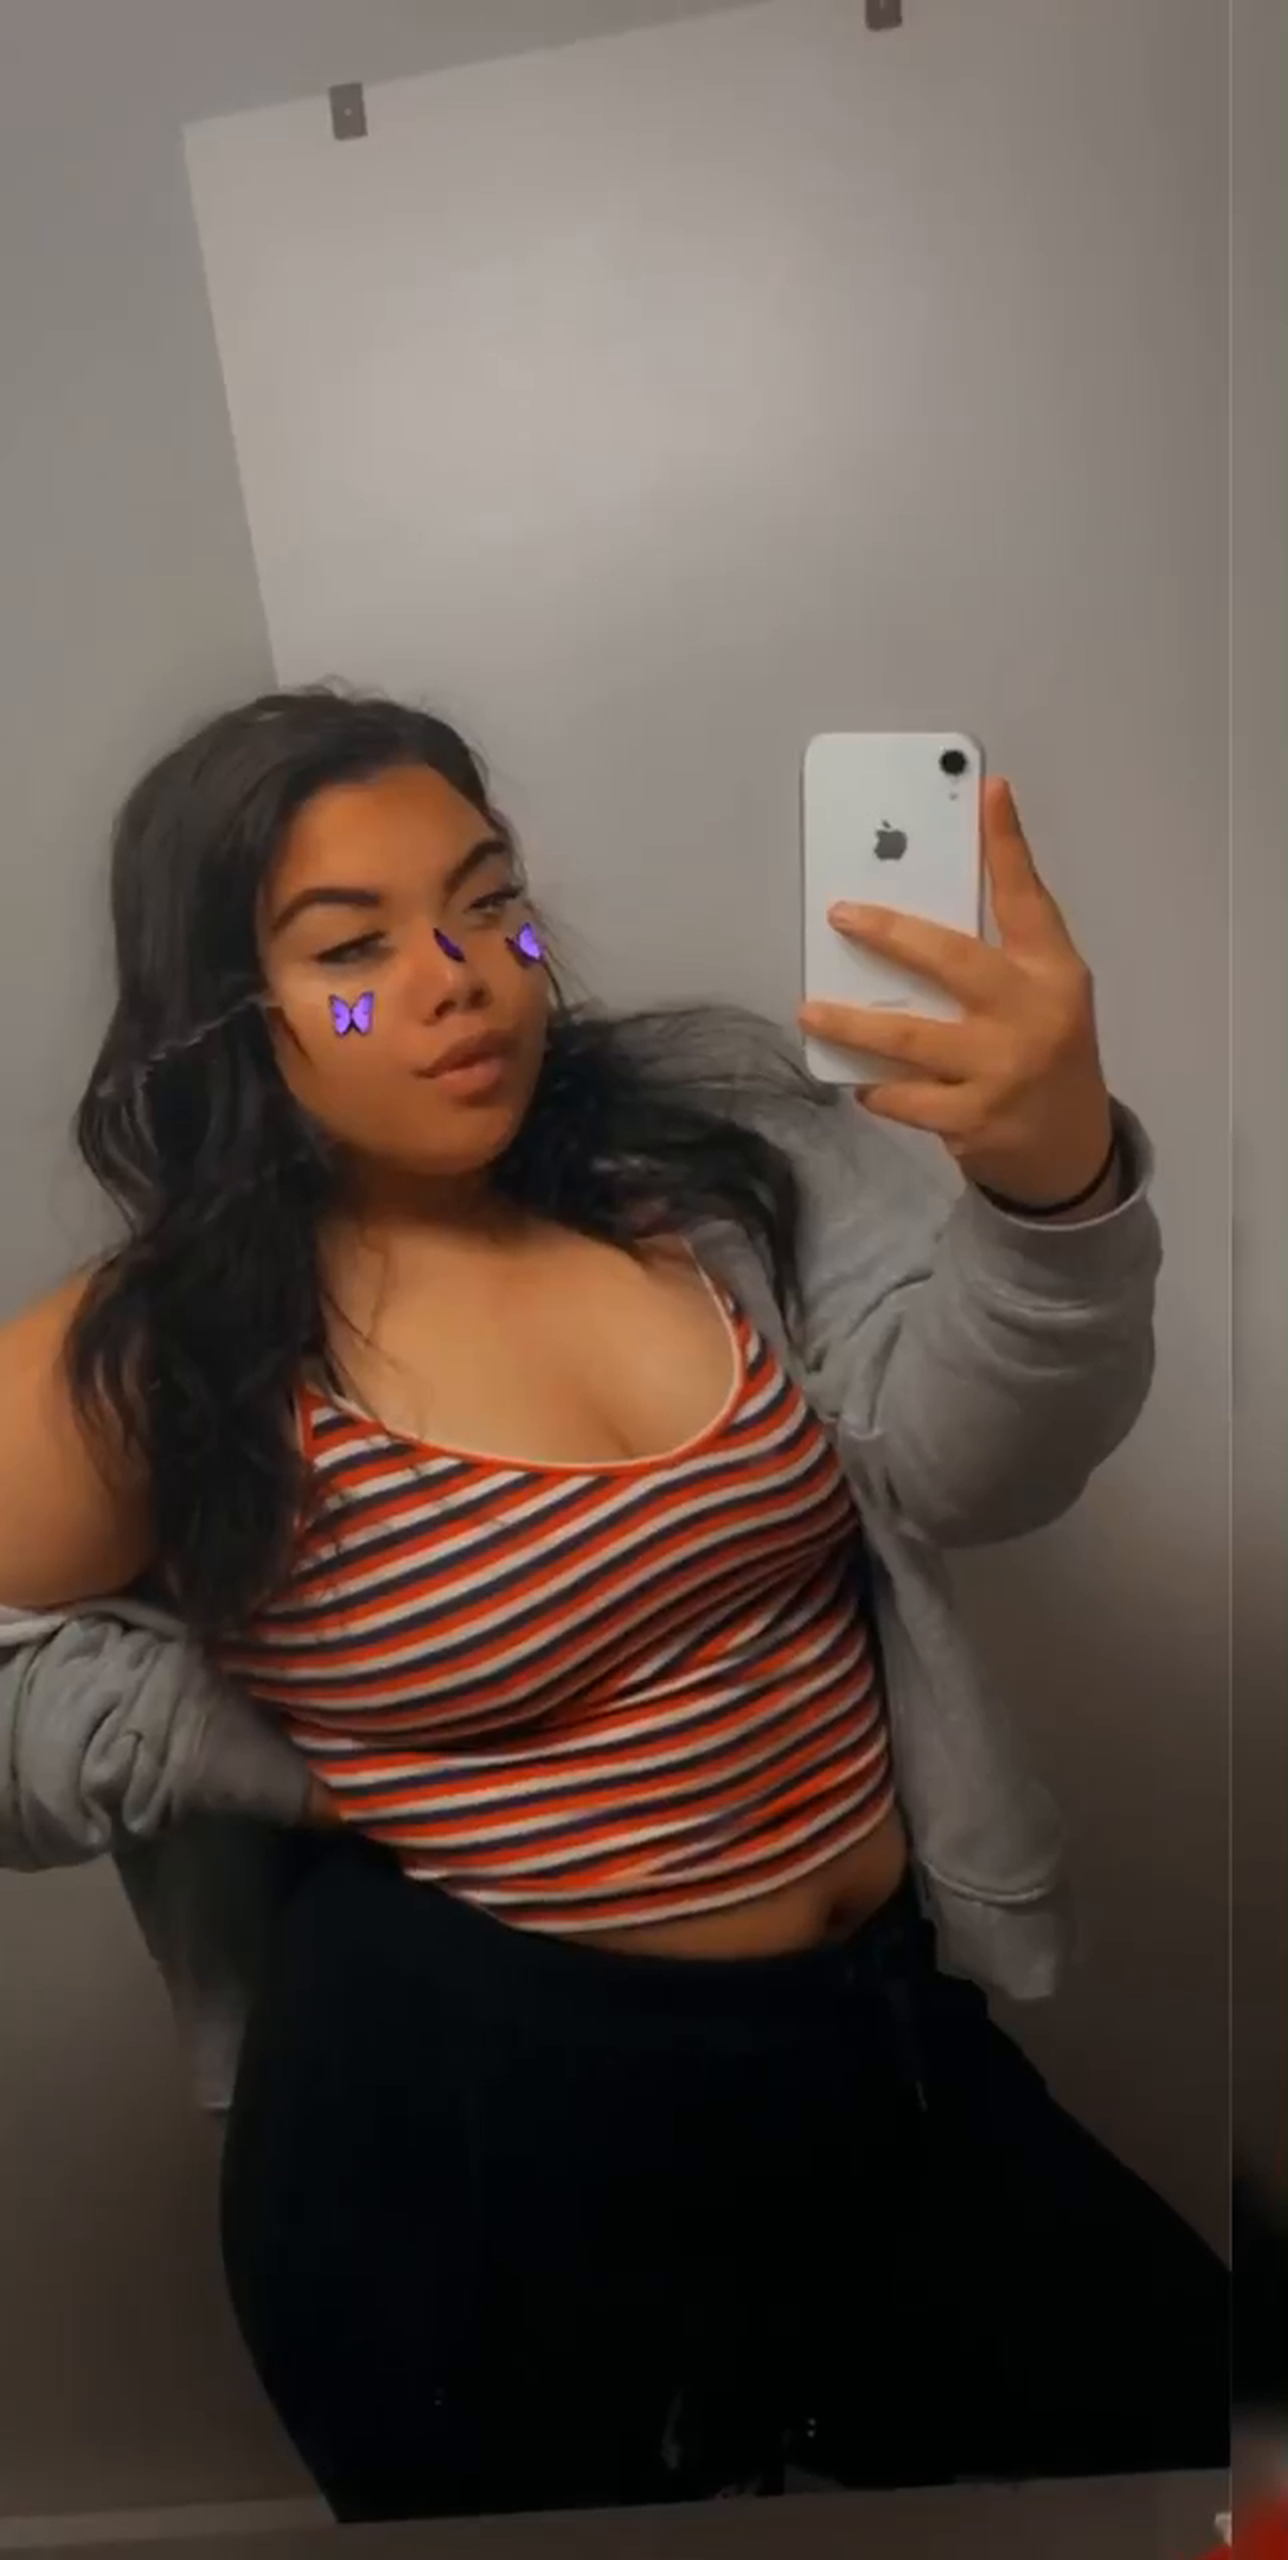 Video post by polynessianbaby